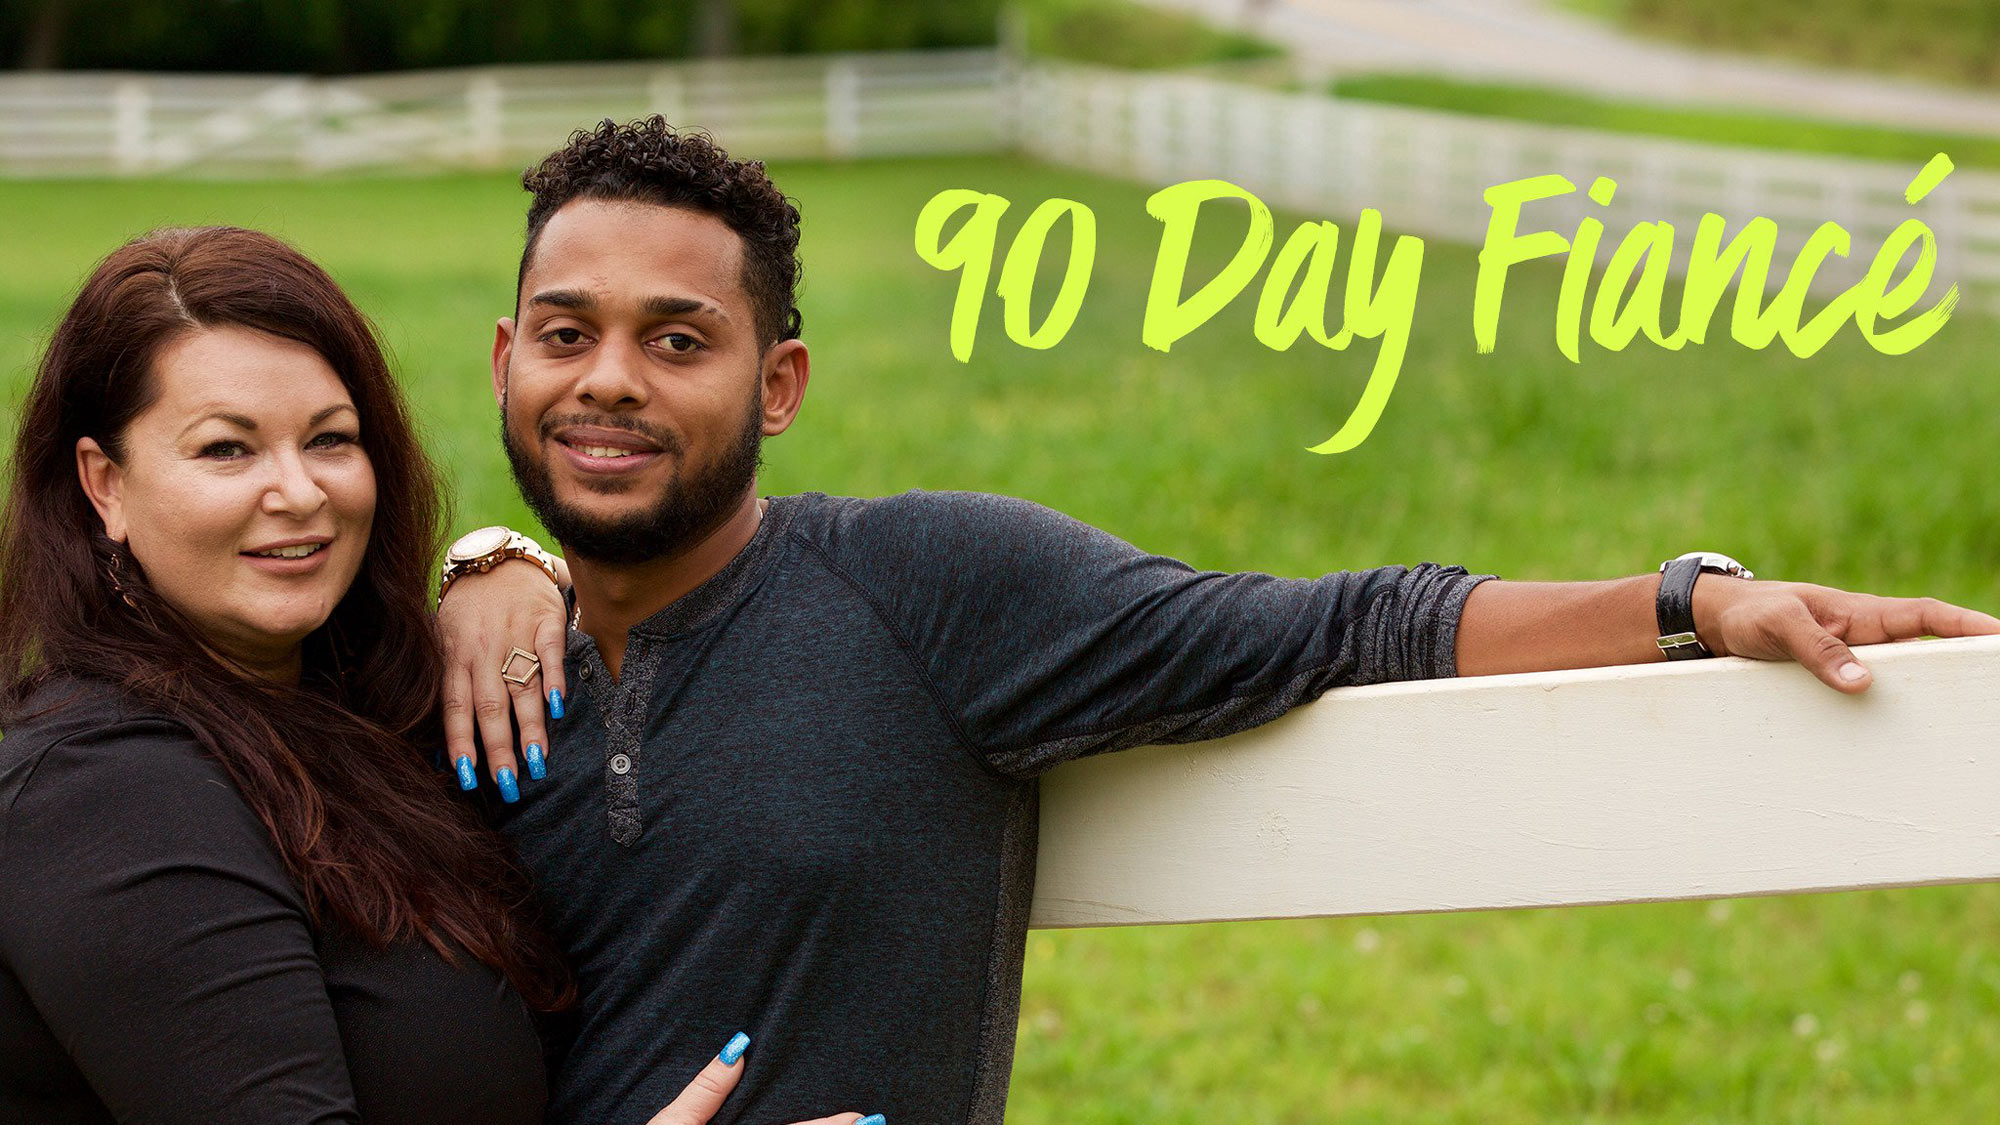 90 day fiance dating app